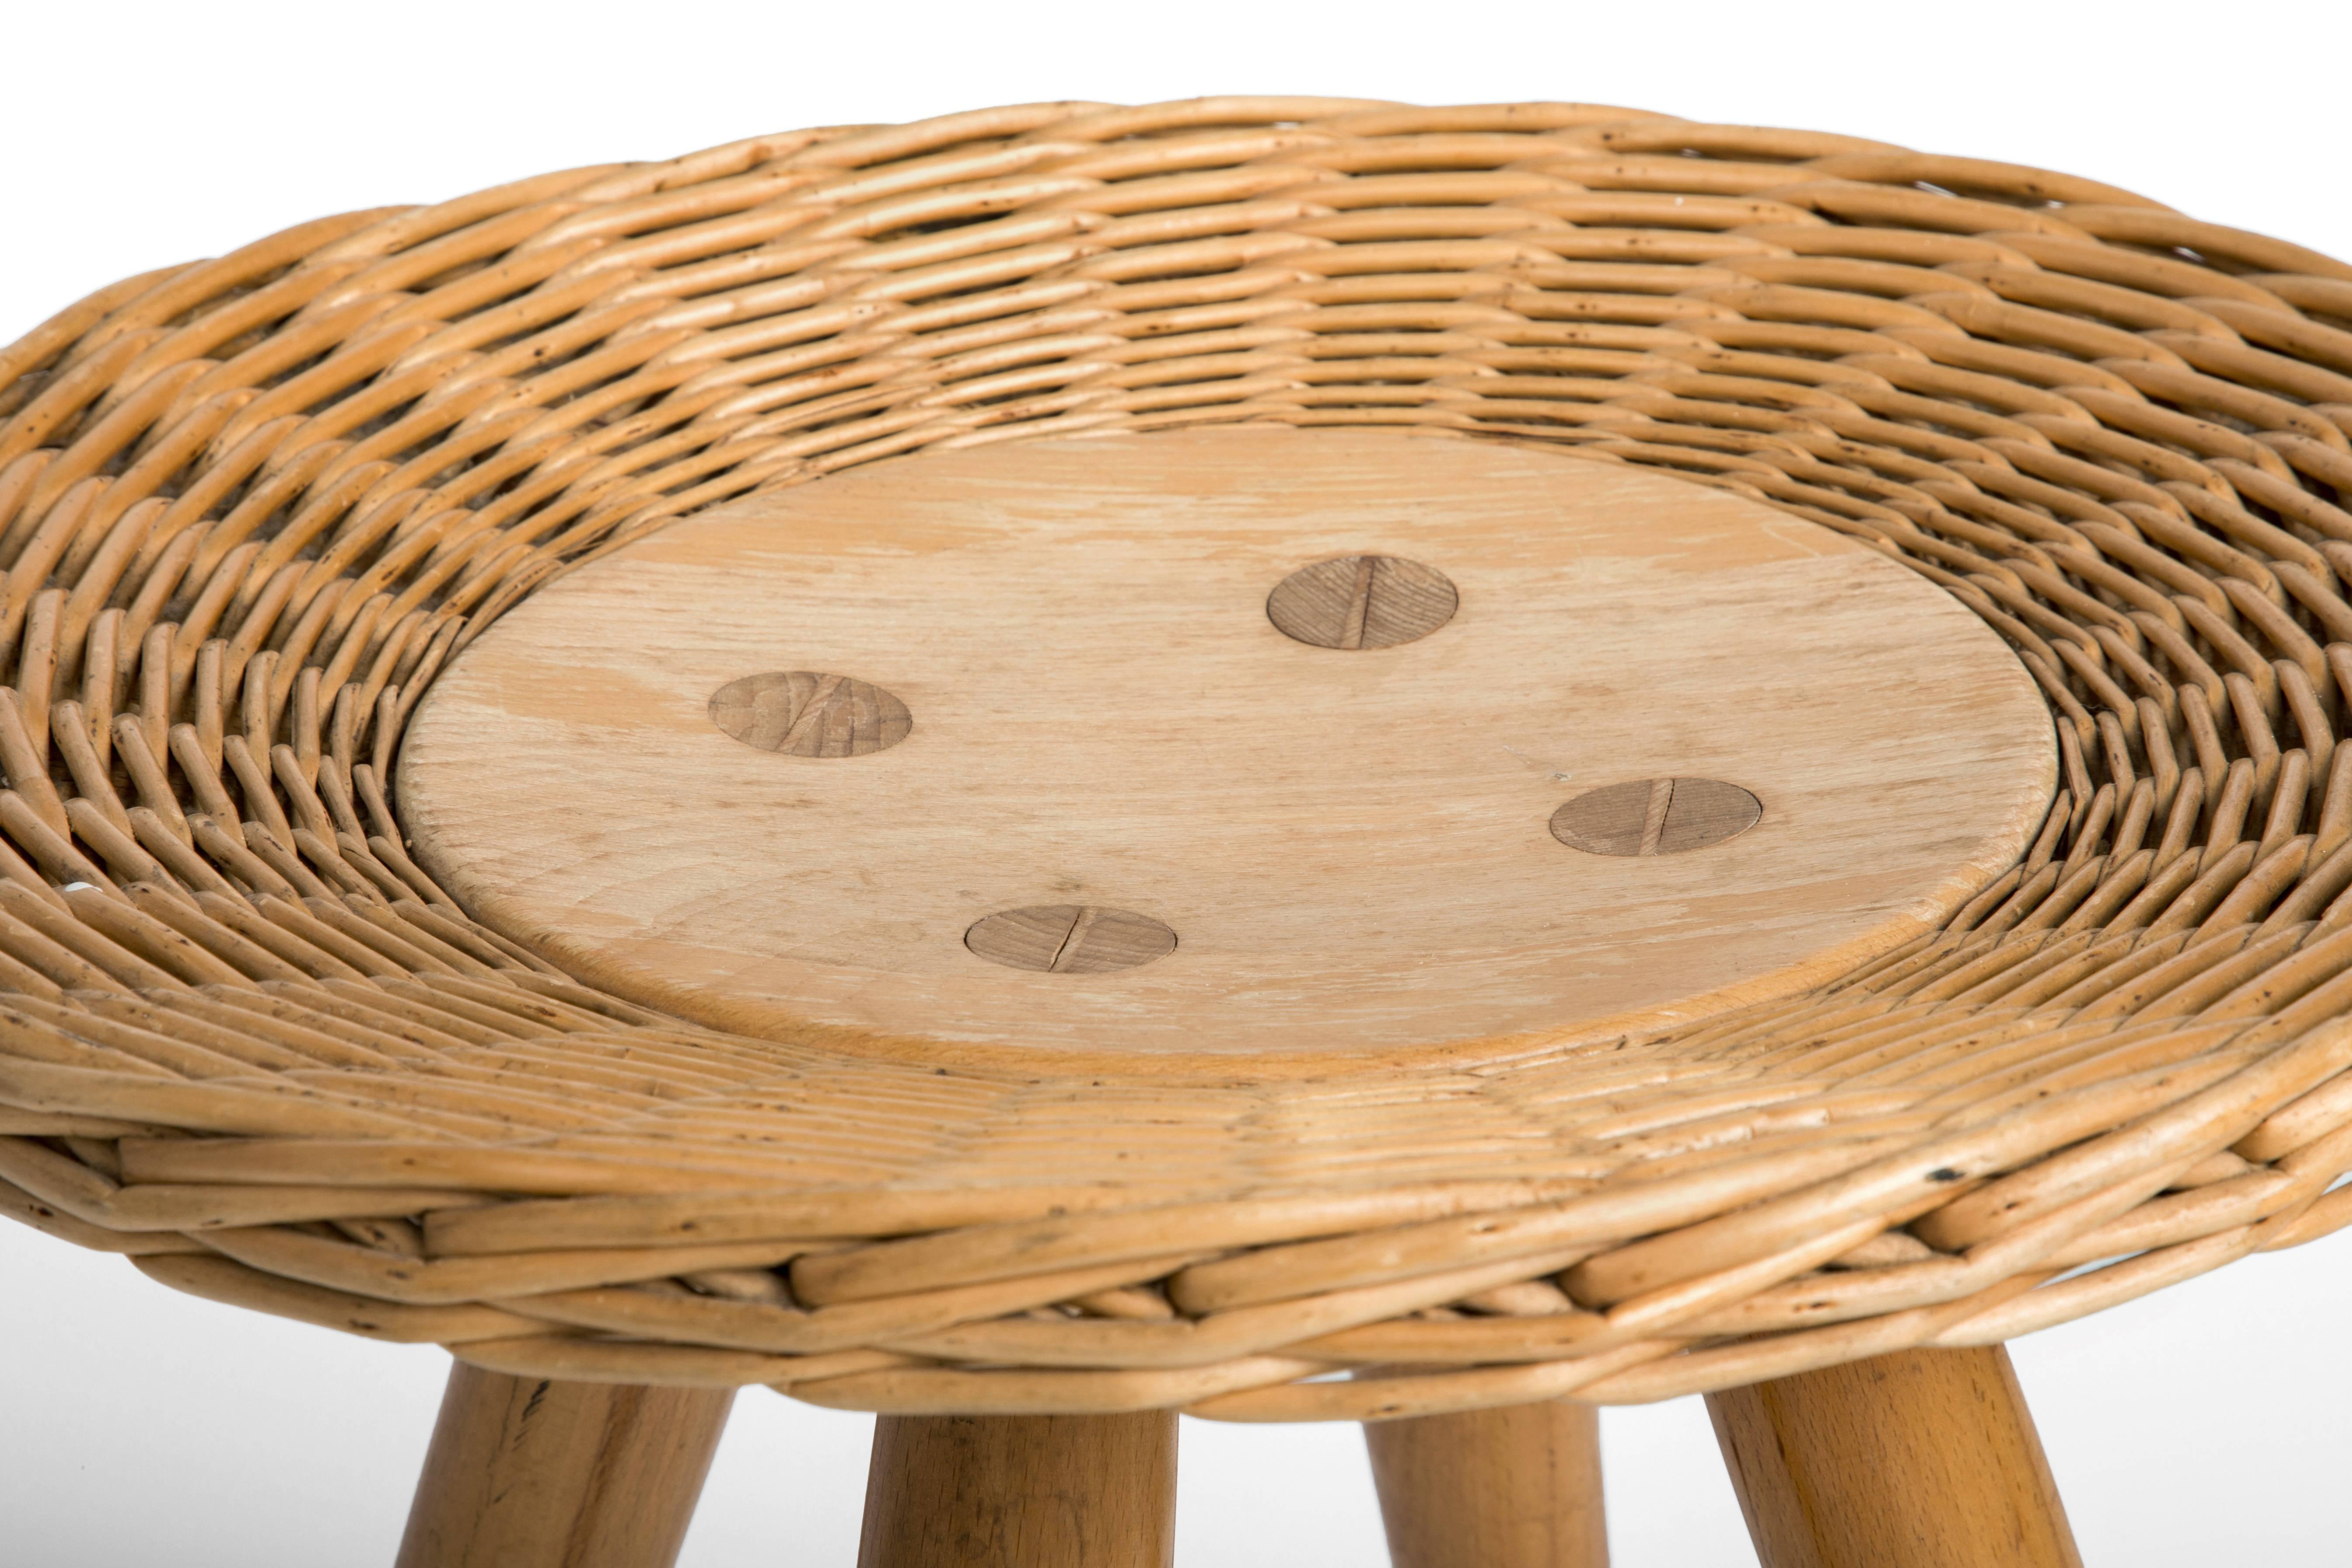 The seat is surrounded by a basket weave border with through tenons in a button pattern.